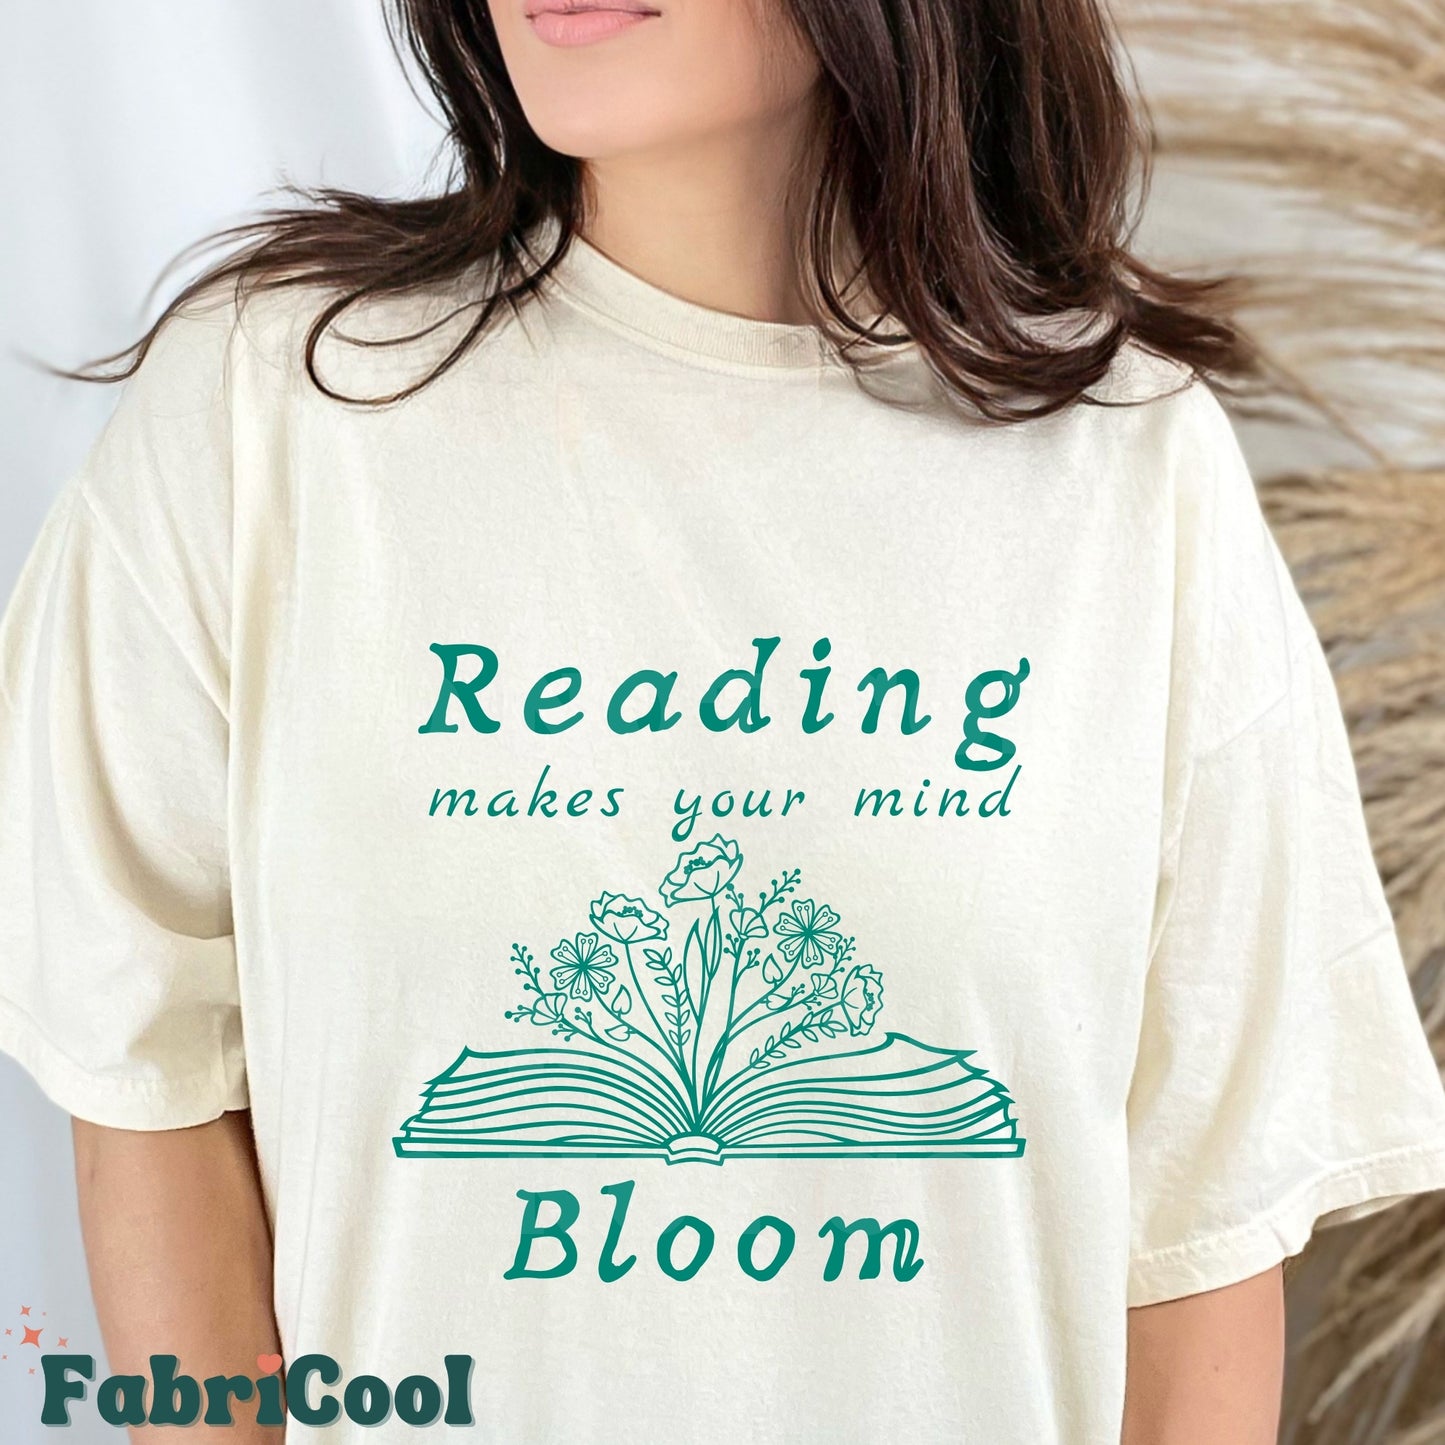 Reading makes your mind bloom - Teal Screen Print Transfer